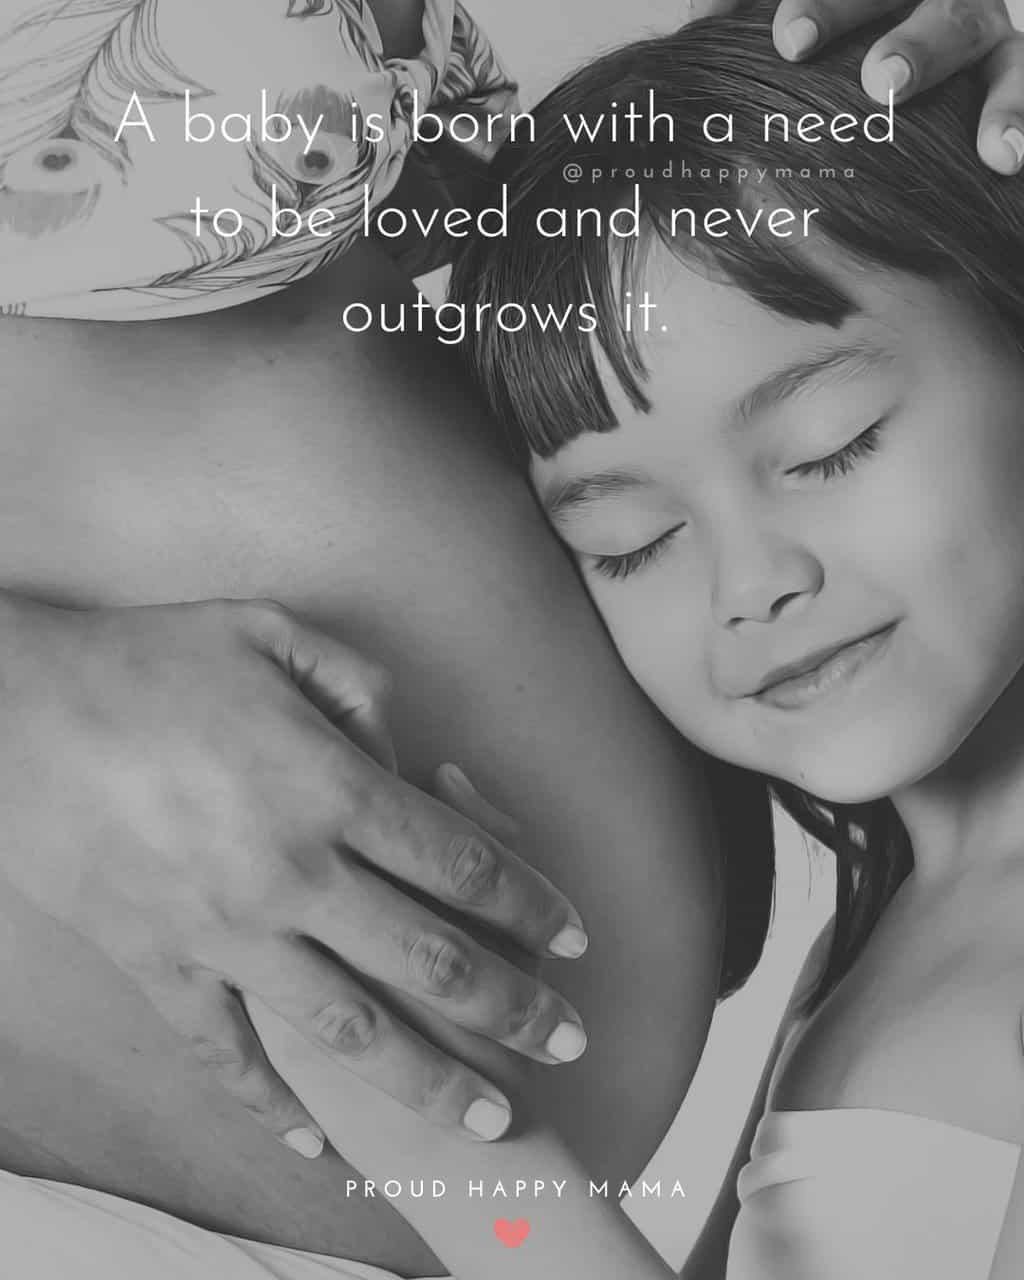 Pregnant Women Quotes | A baby is born with a need to be loved and never outgrows it.